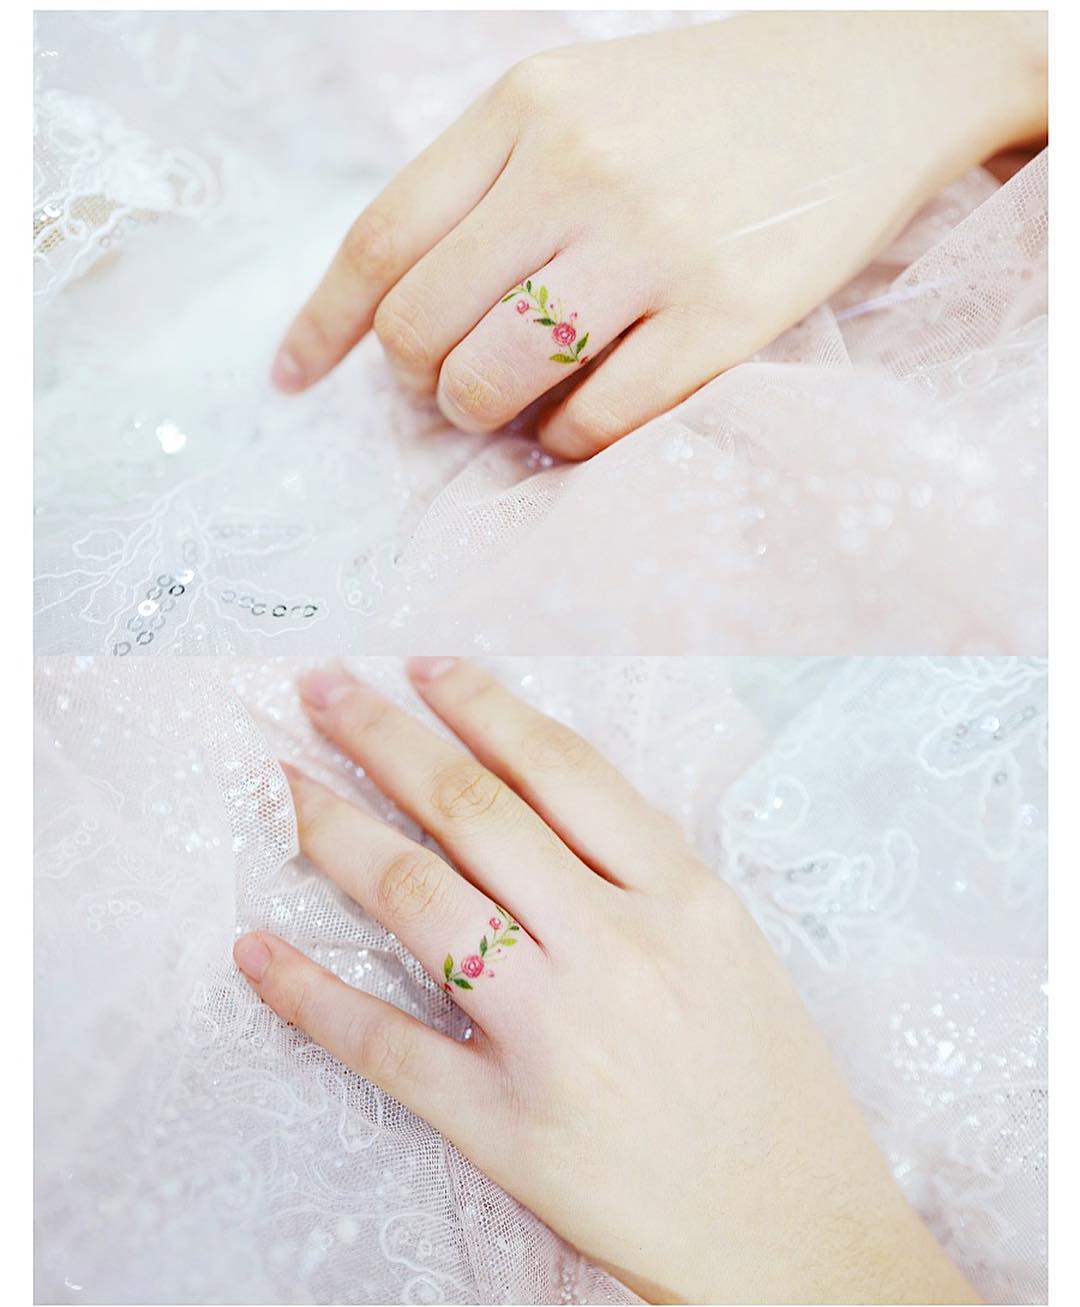 Women's ring finger tattoo - Floral Ring Tattoo